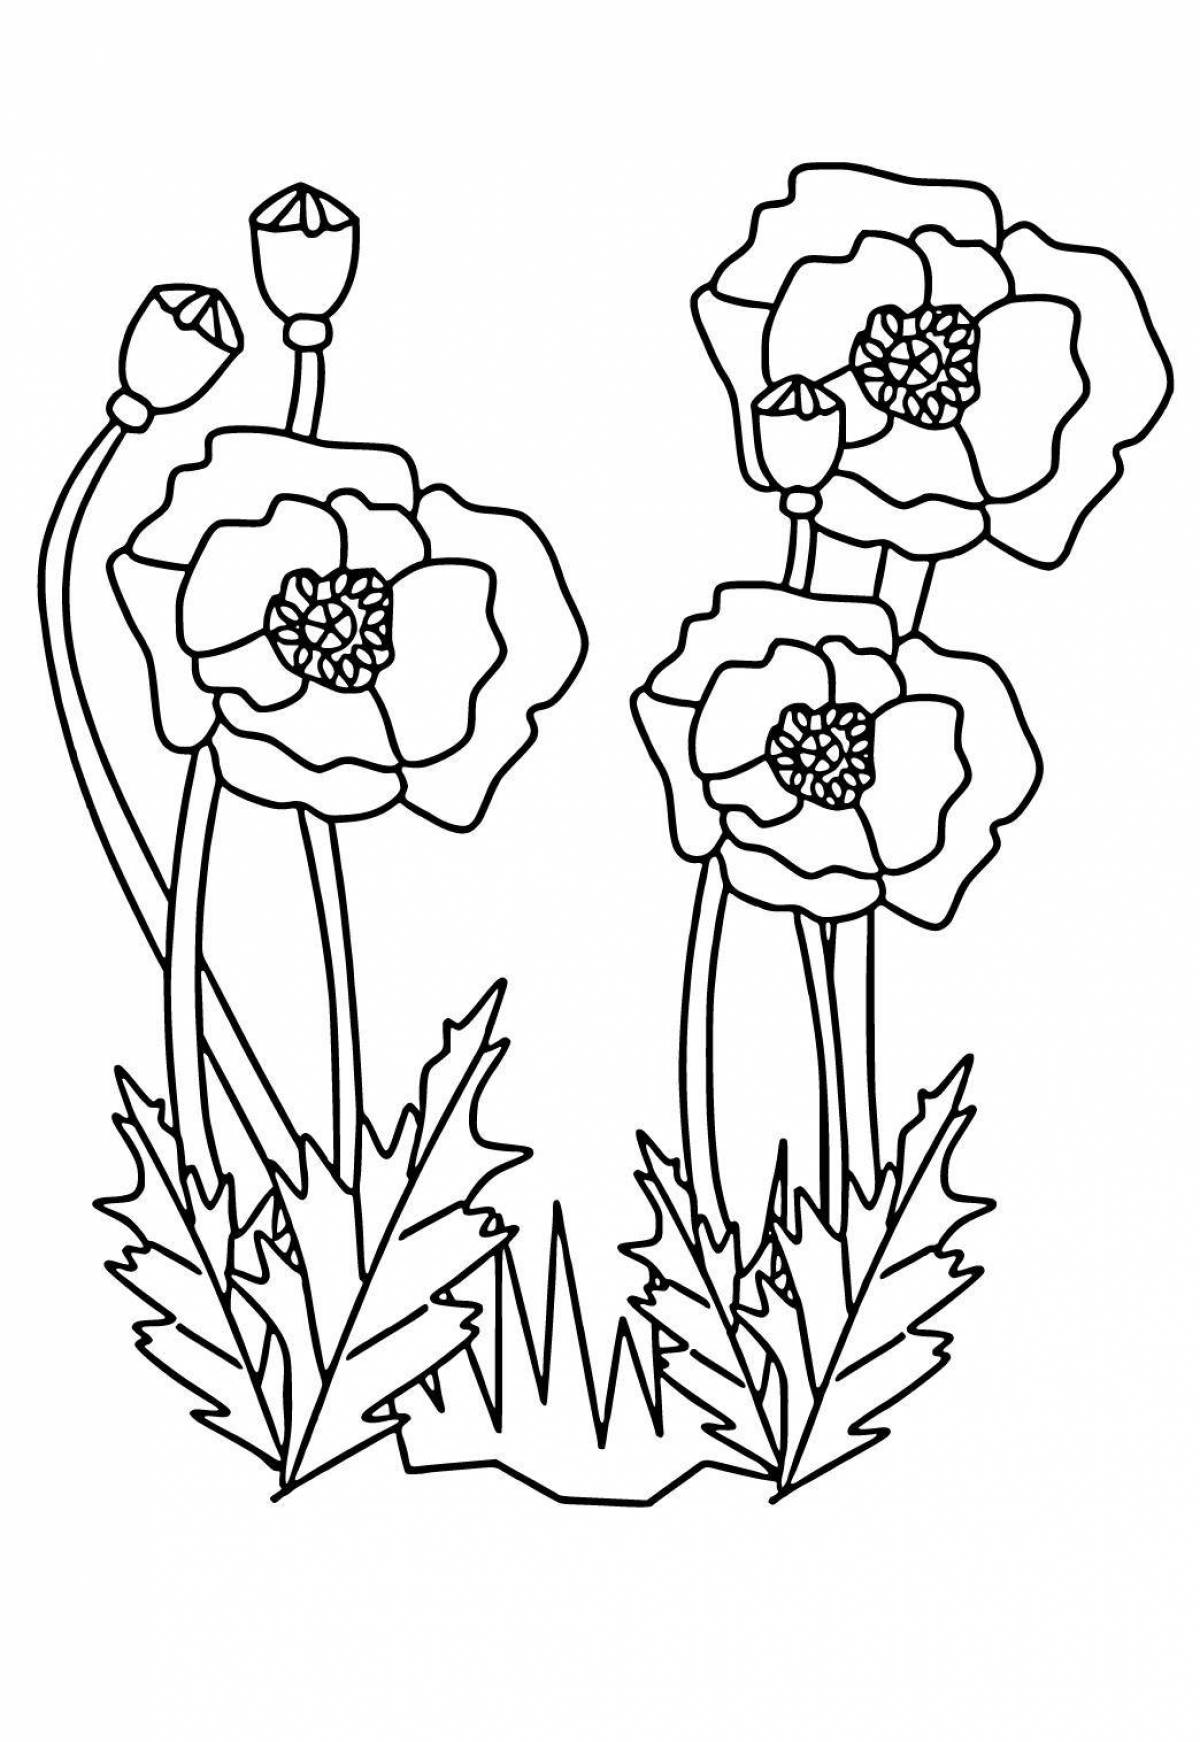 Refreshing poppy coloring page